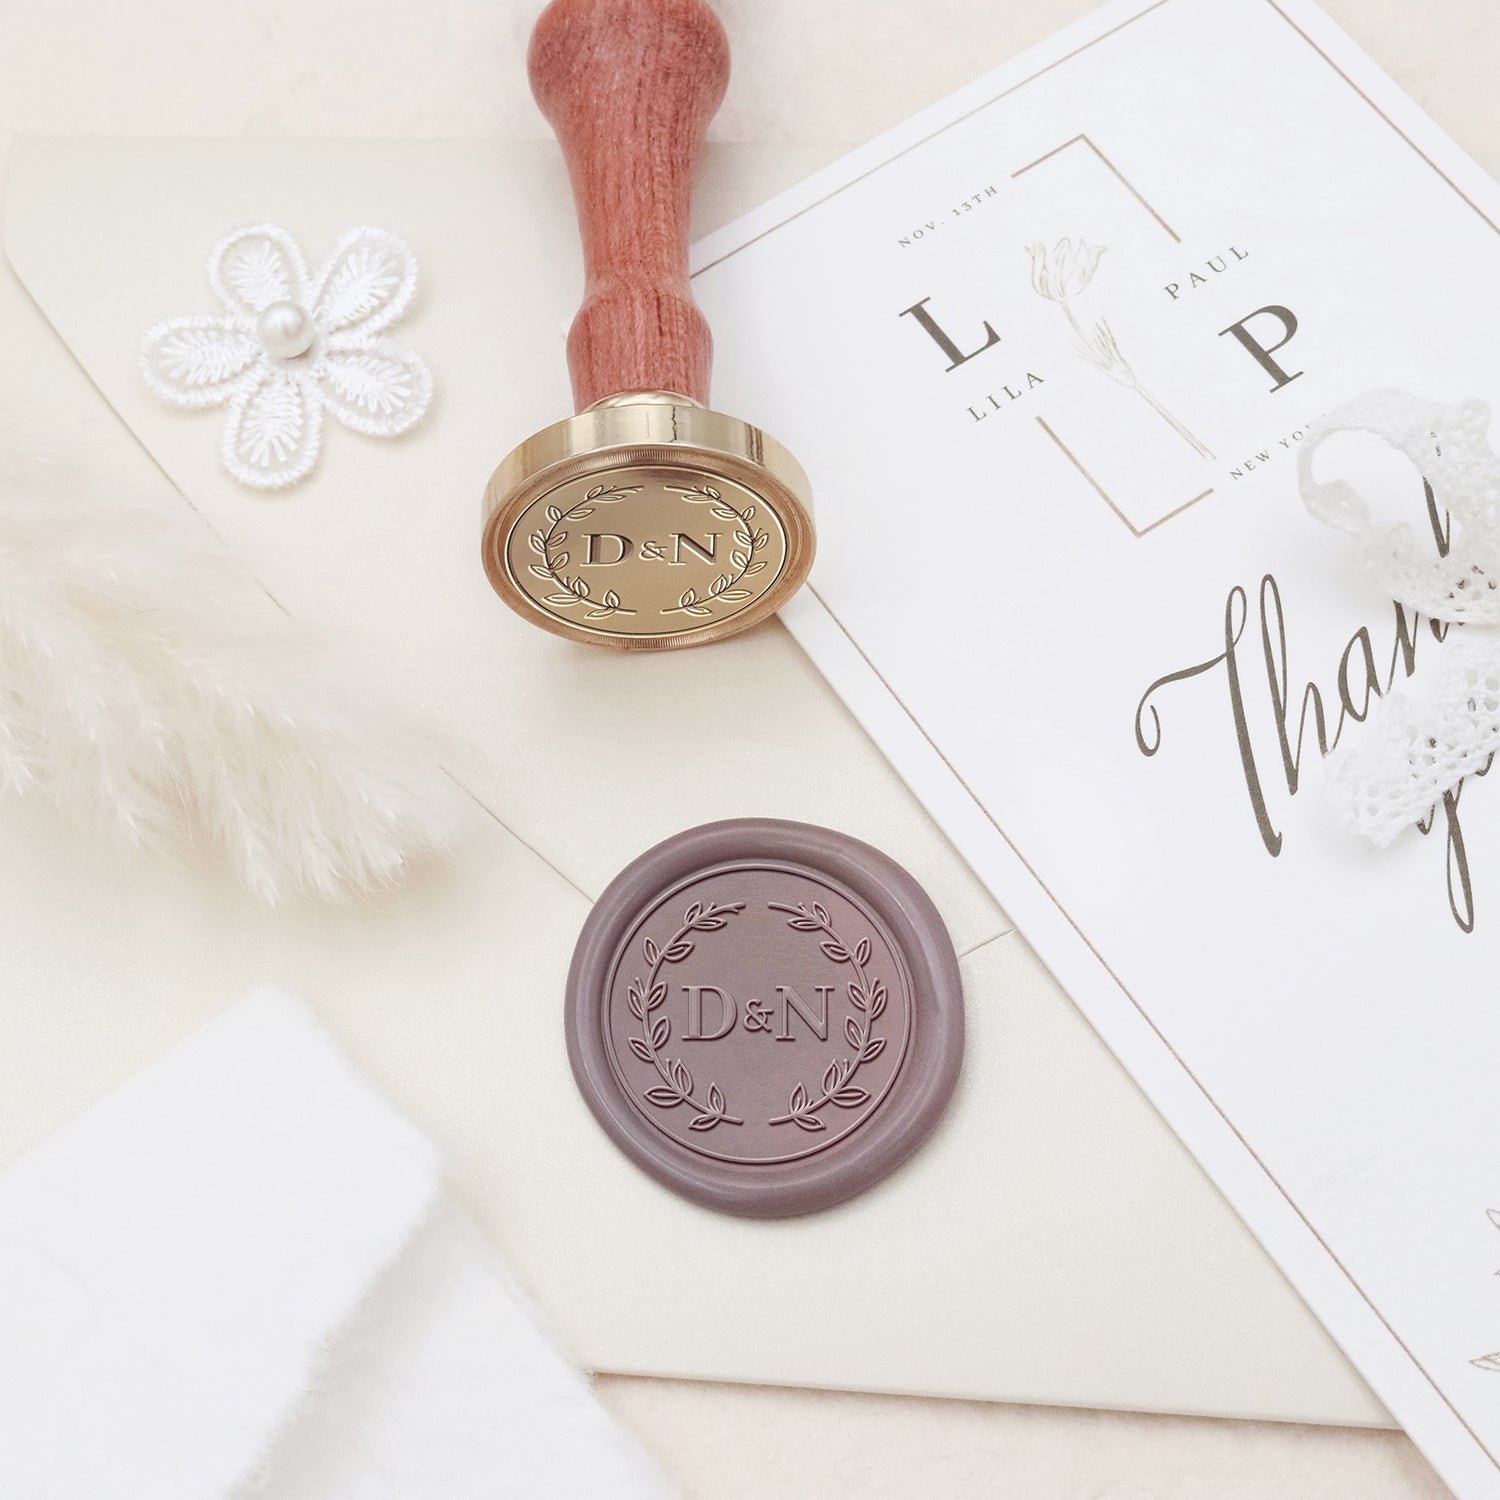 CRASPIRE Custom Wax Seal Stamp Personalized Name Customized Sealing Wax  Stamp Vintage Made Your Own Logo Stamp Seal 25mm for Wedding Invitation  Gifts